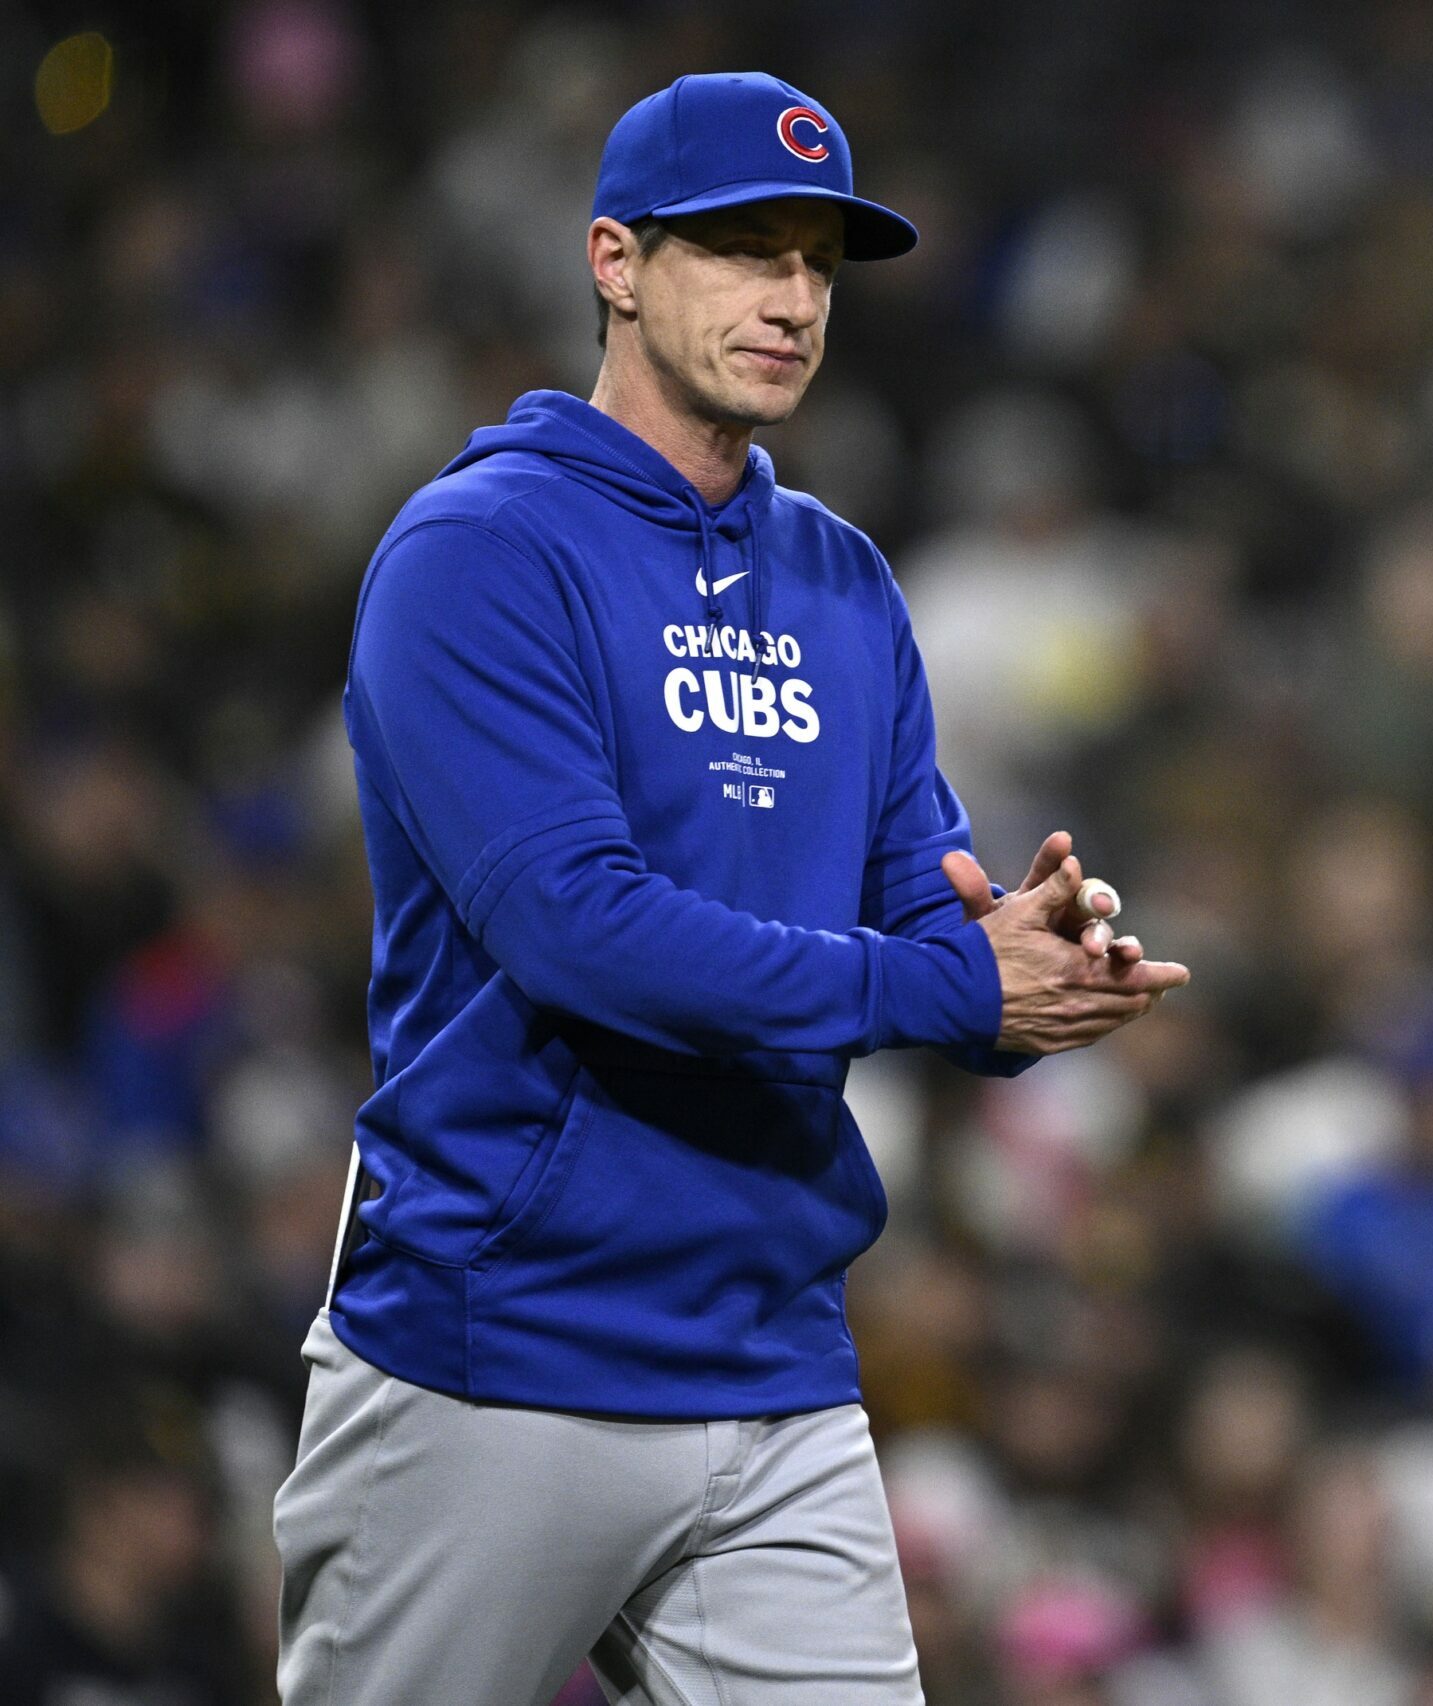 Milwaukee Brewers, Craig Counsell, Chicago Cubs